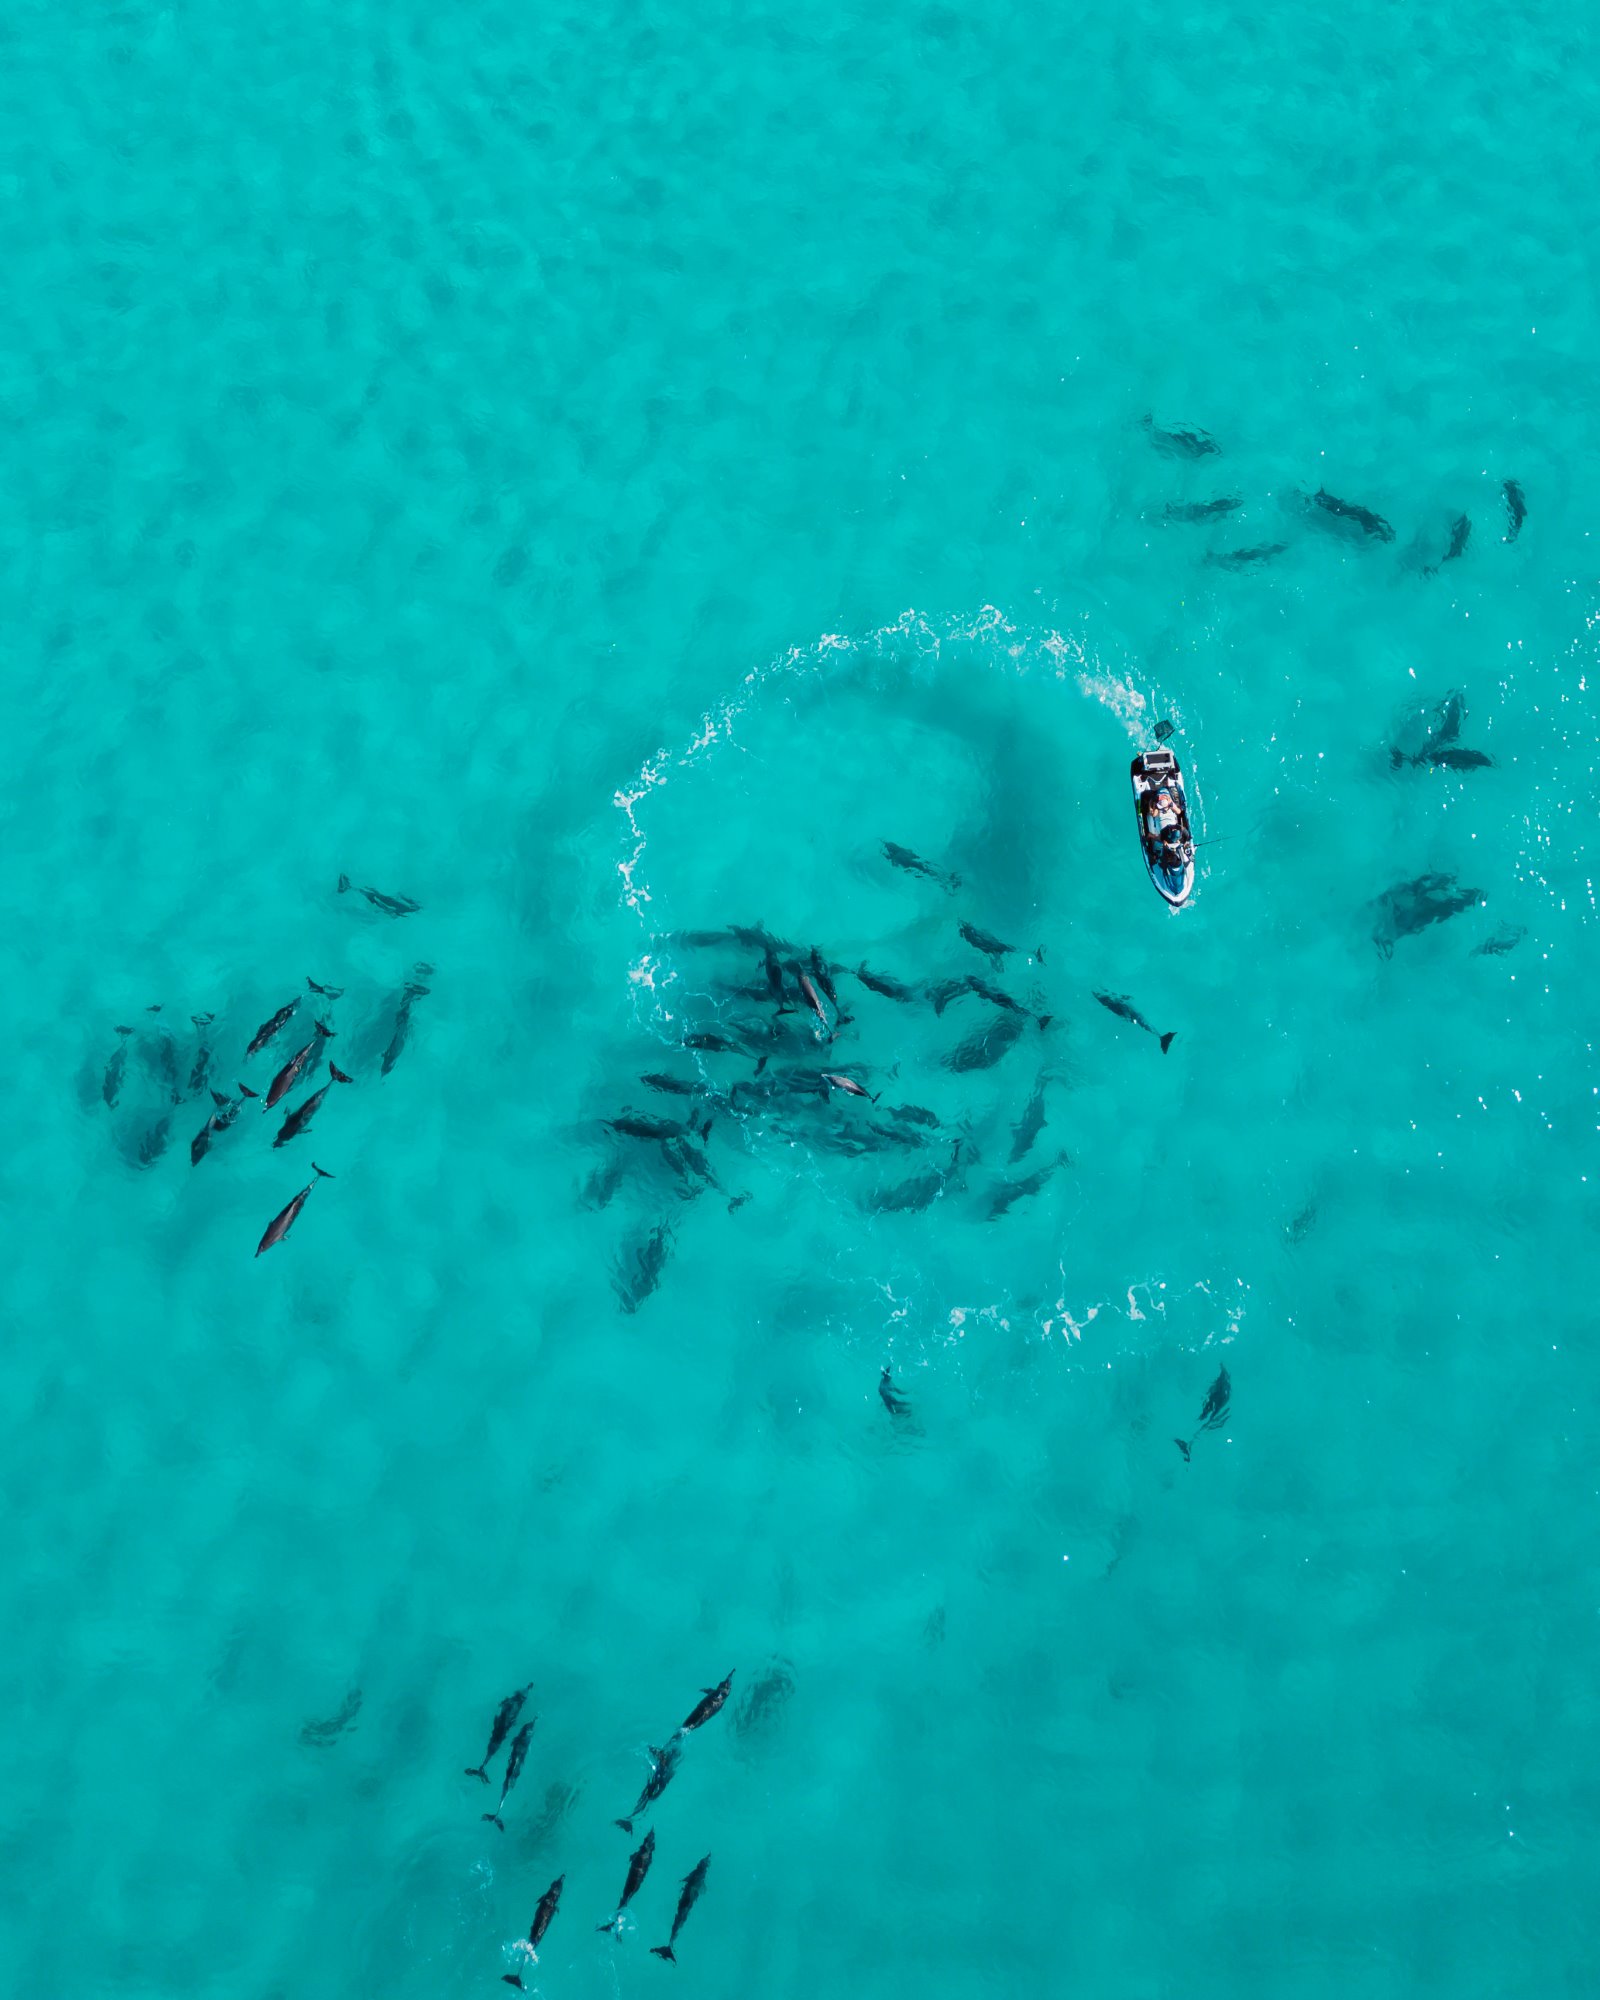 An aerial view of a motor boat in the turquoise waters of Twilight Beach, Esperance, creating ripples as a school of dolphins forms an arc around them.